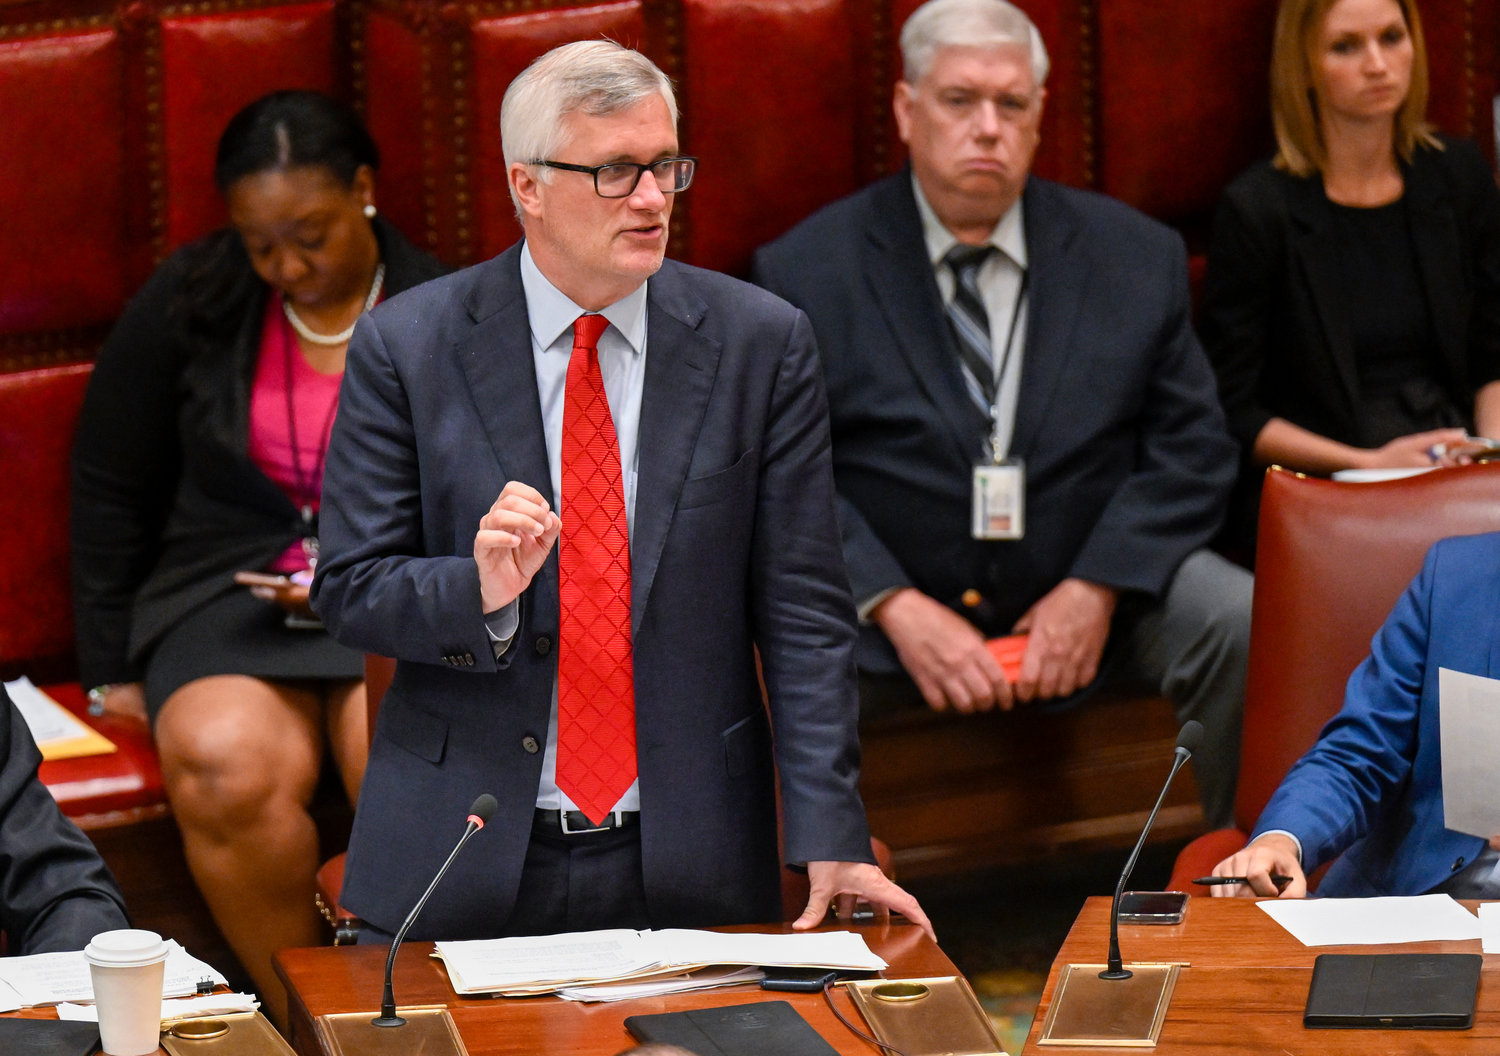 Sen. Brian Kavanagh, D- New York, Manhattan, speaks in favor of a package of gun reform bills restricting body armor at the state Capitol on the last scheduled day of the 2022 legislative session Thursday, June 2, 2022, in Albany, N.Y. (AP Photo/Hans Pennink)